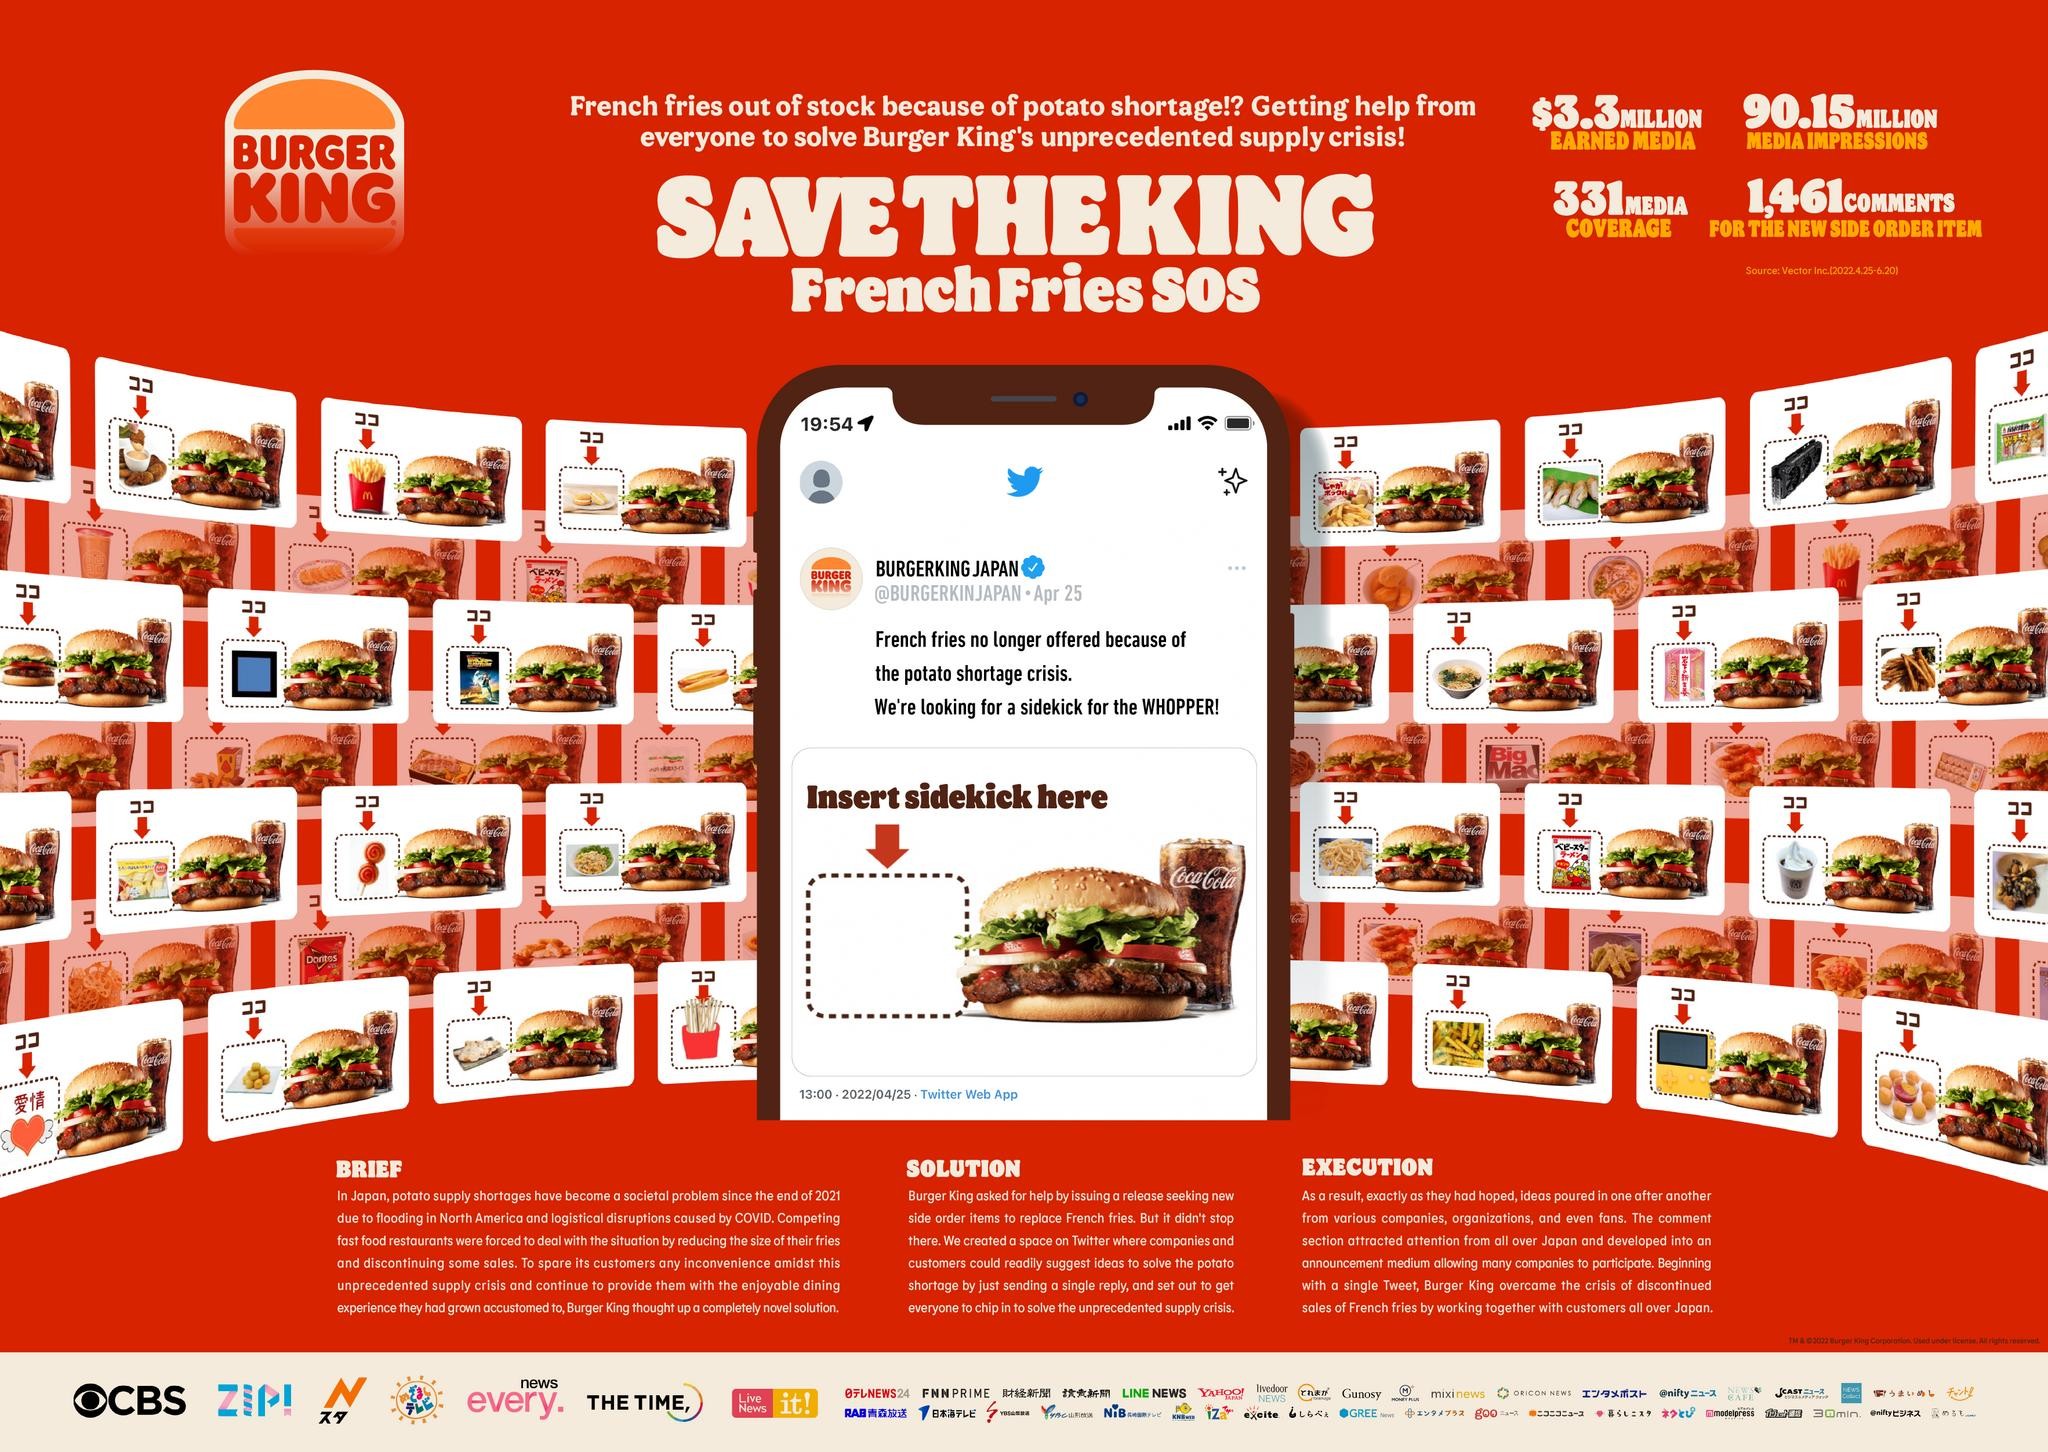 SAVE THE KING/French fries SOS